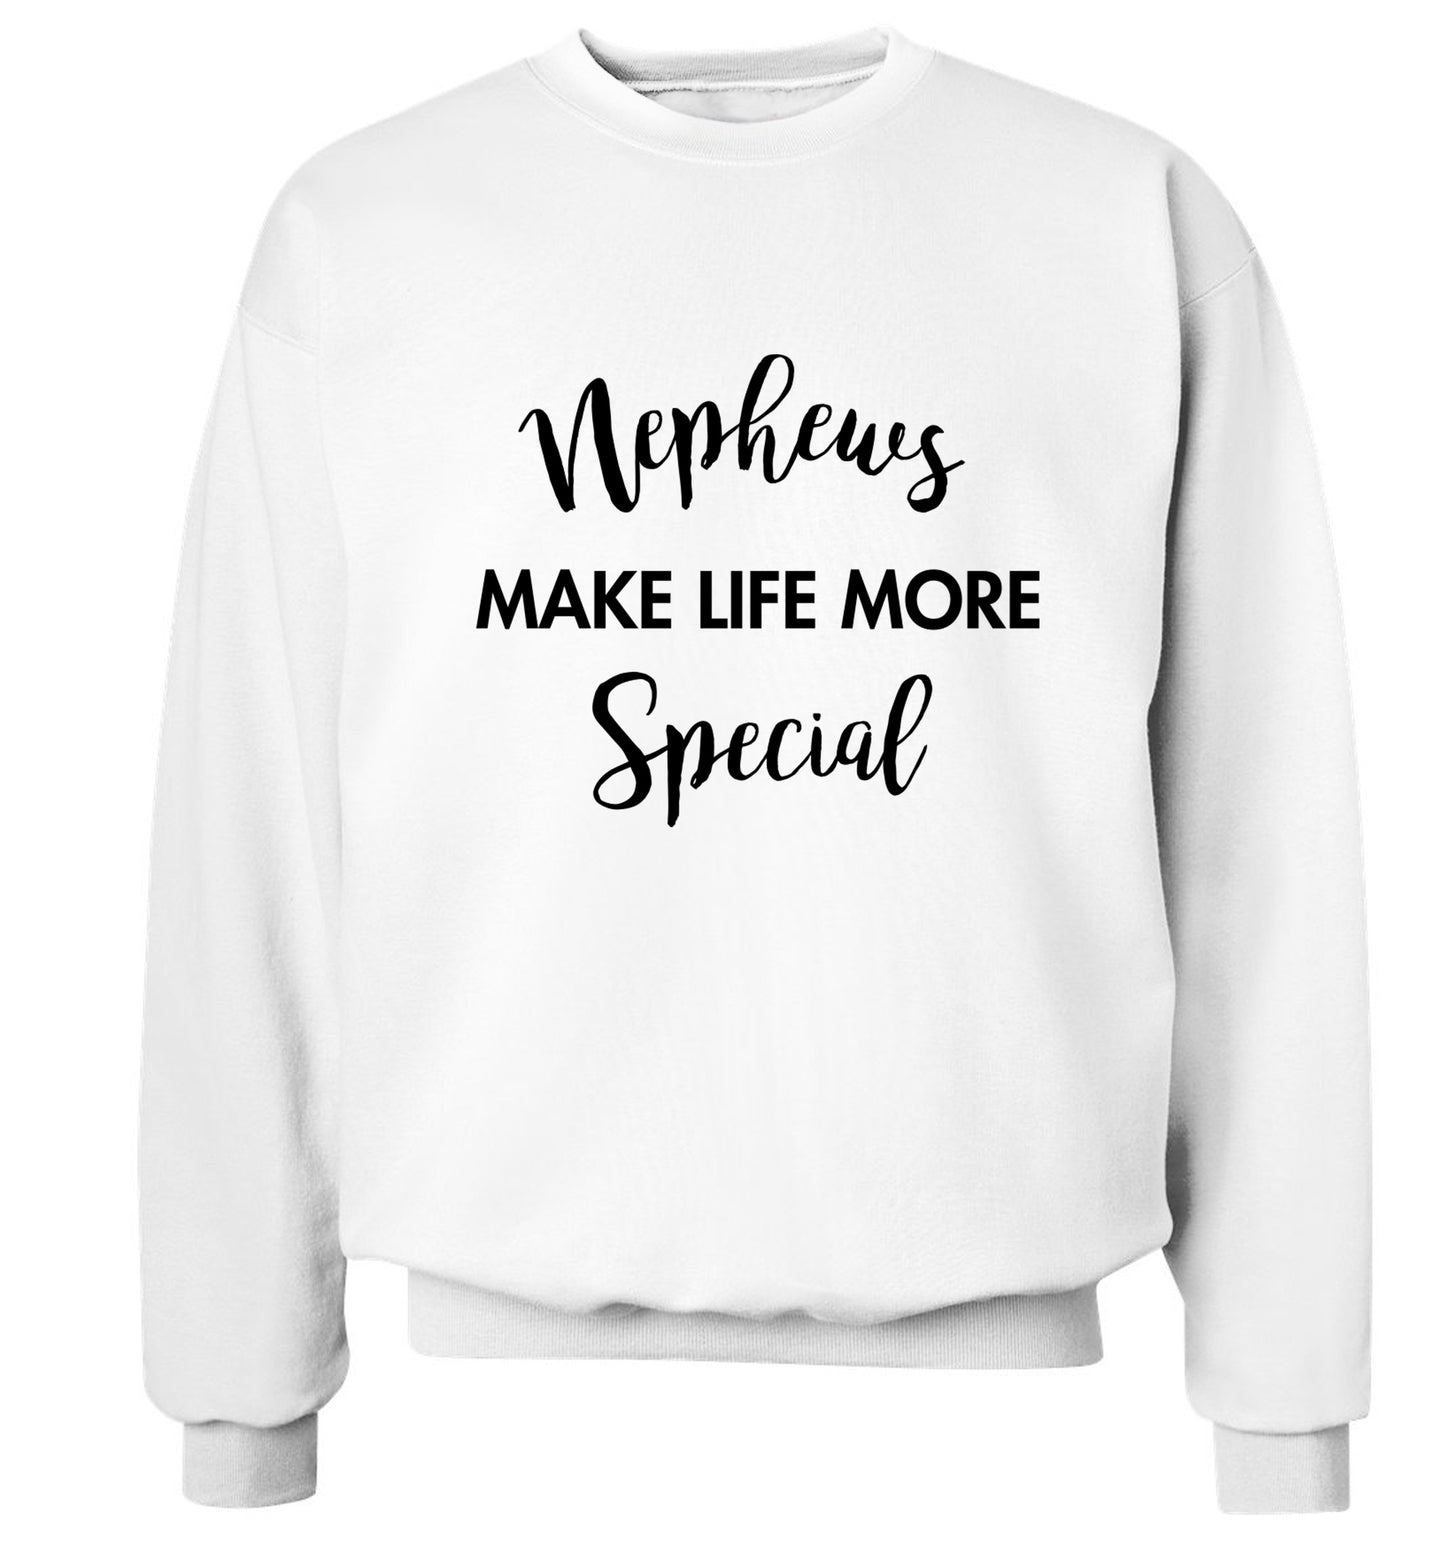 Nephews make life more special Adult's unisex white Sweater 2XL